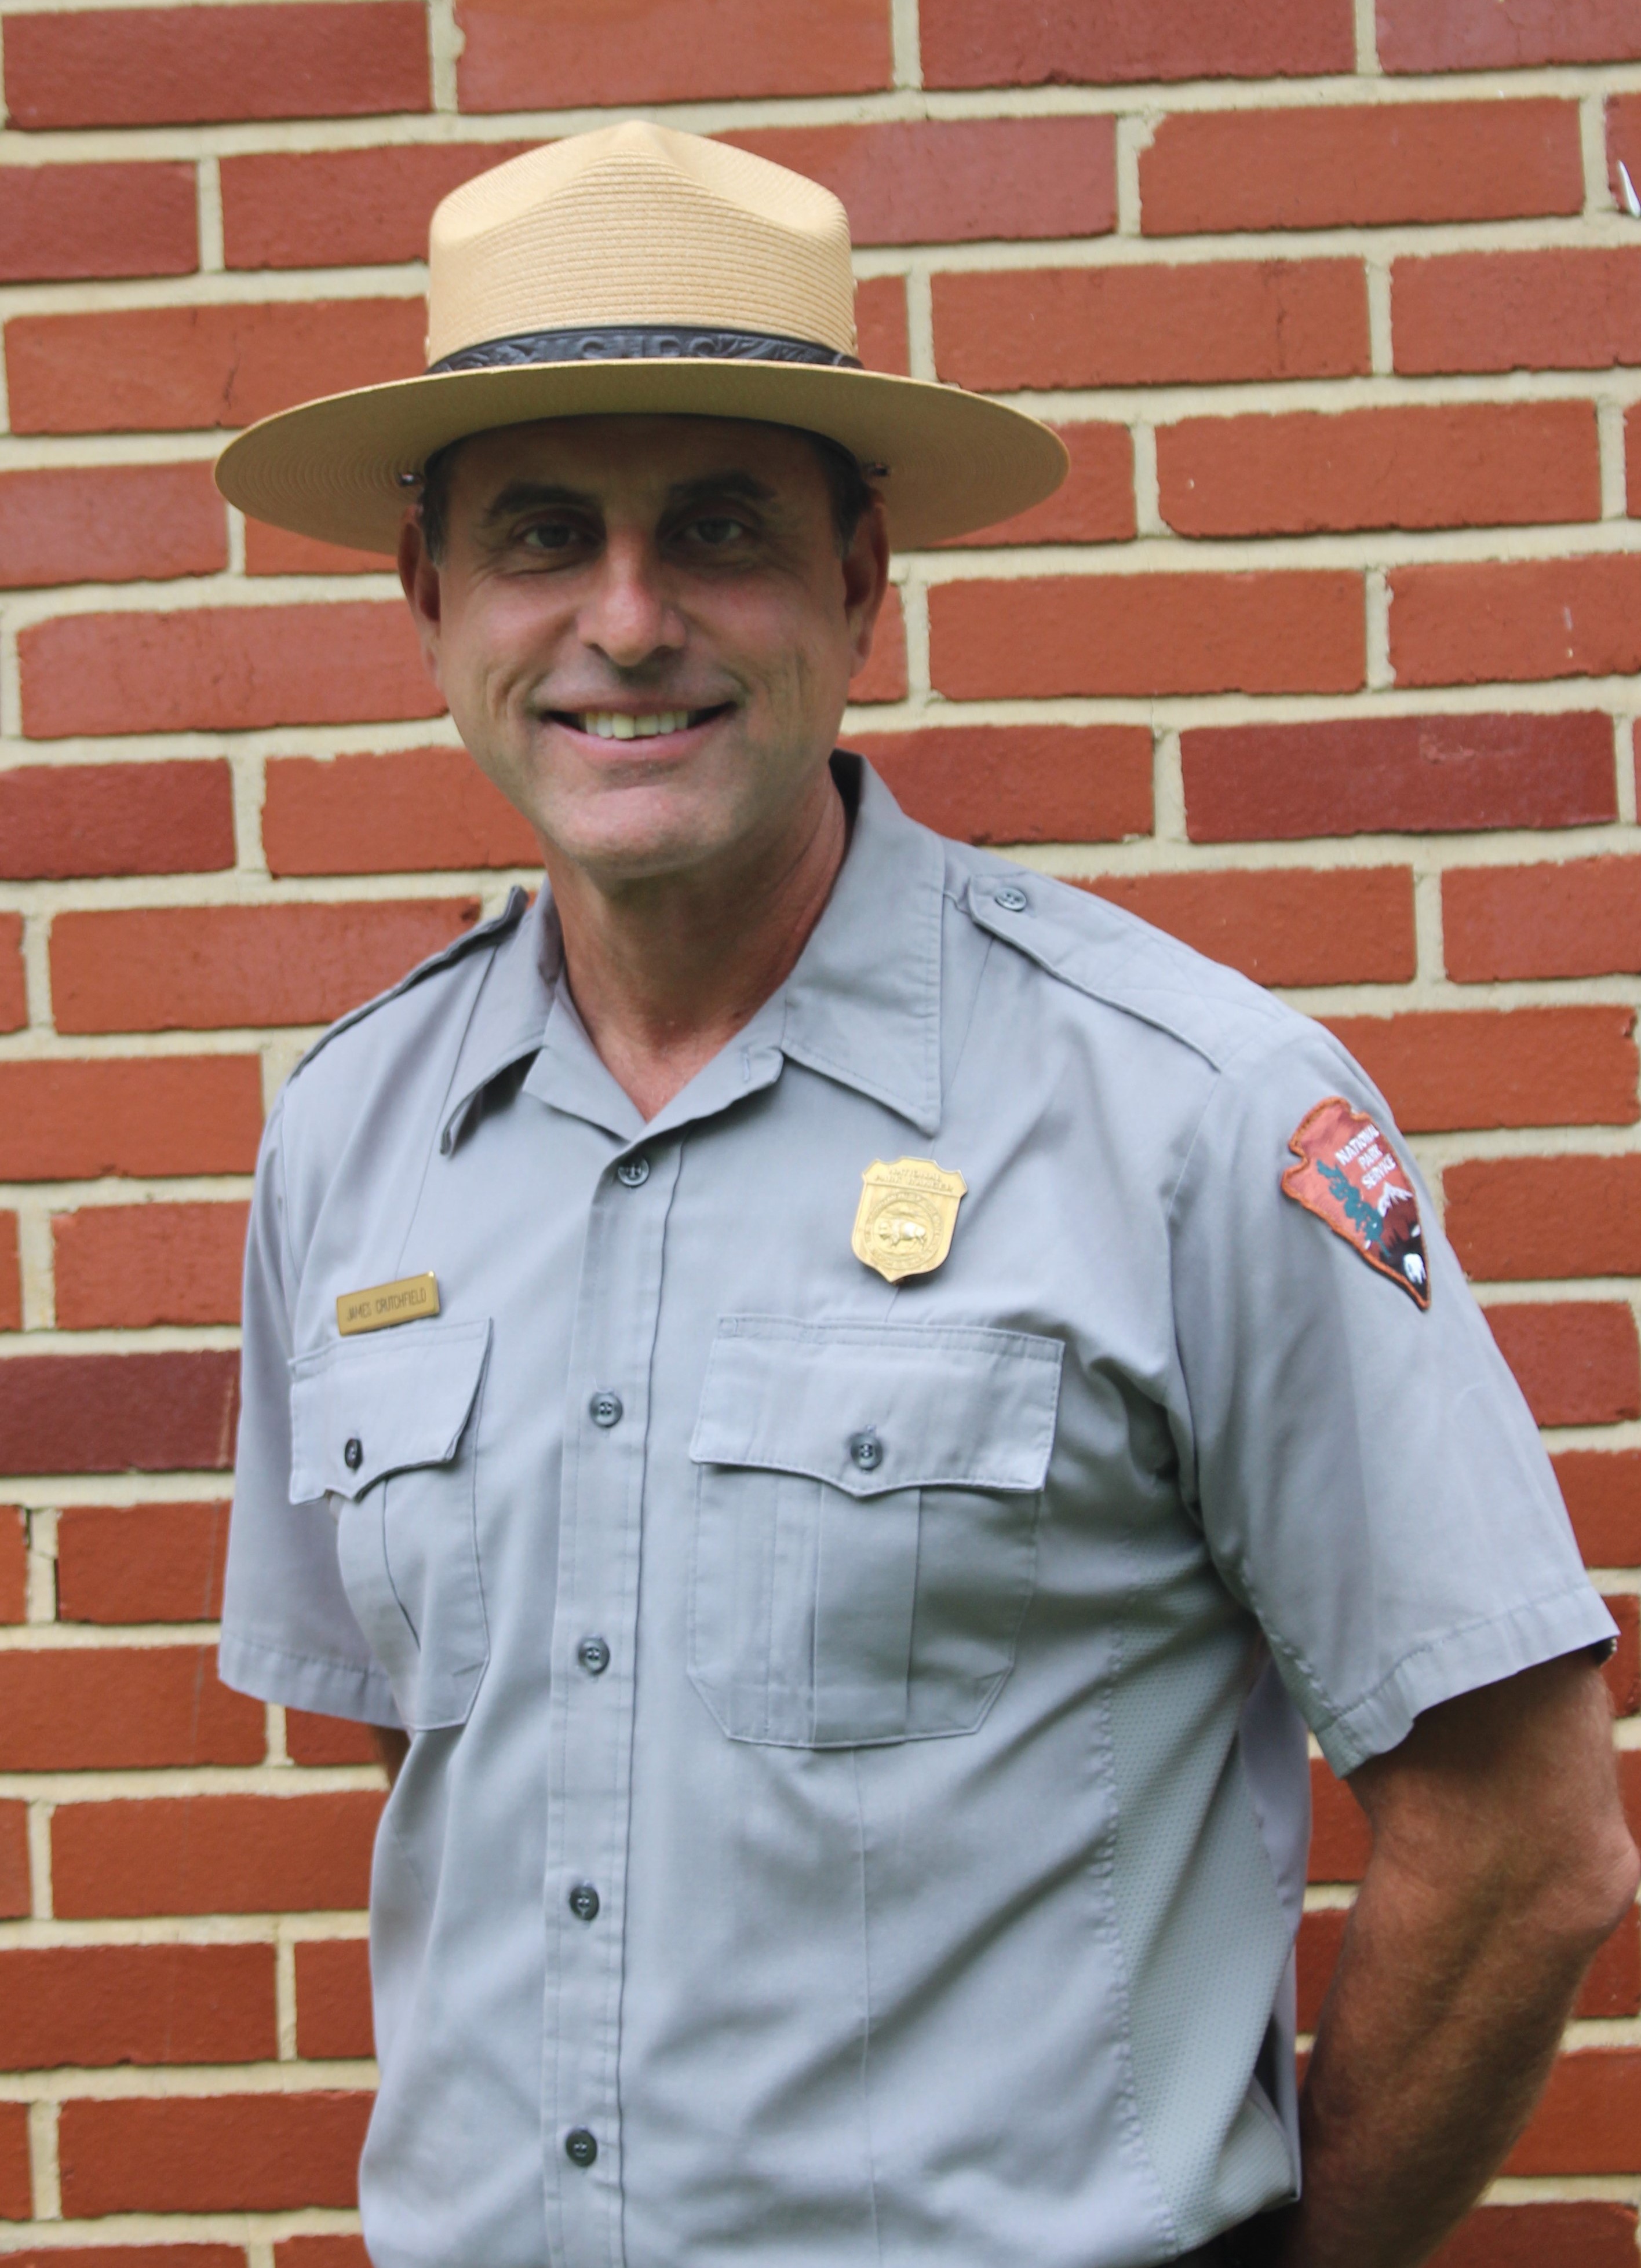 A smiling man in a park ranger uniform and classic flat hat stands in front of a brick wall.